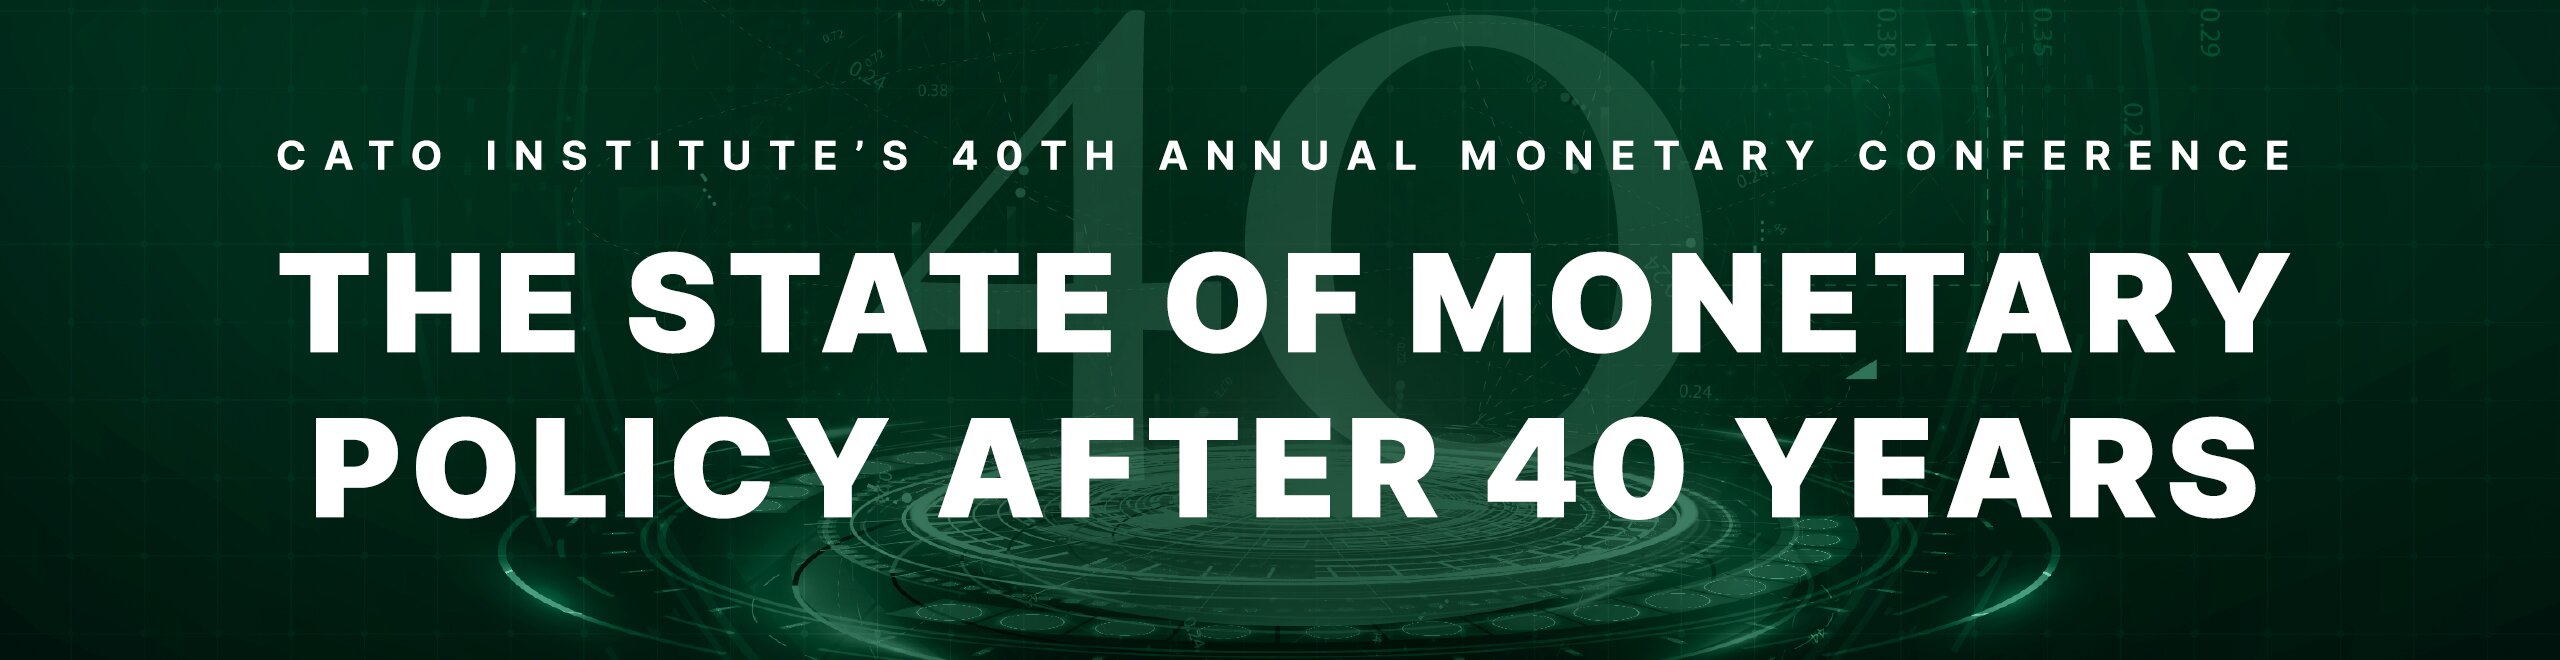 Cato 40th Annual Monetary Conference Banner